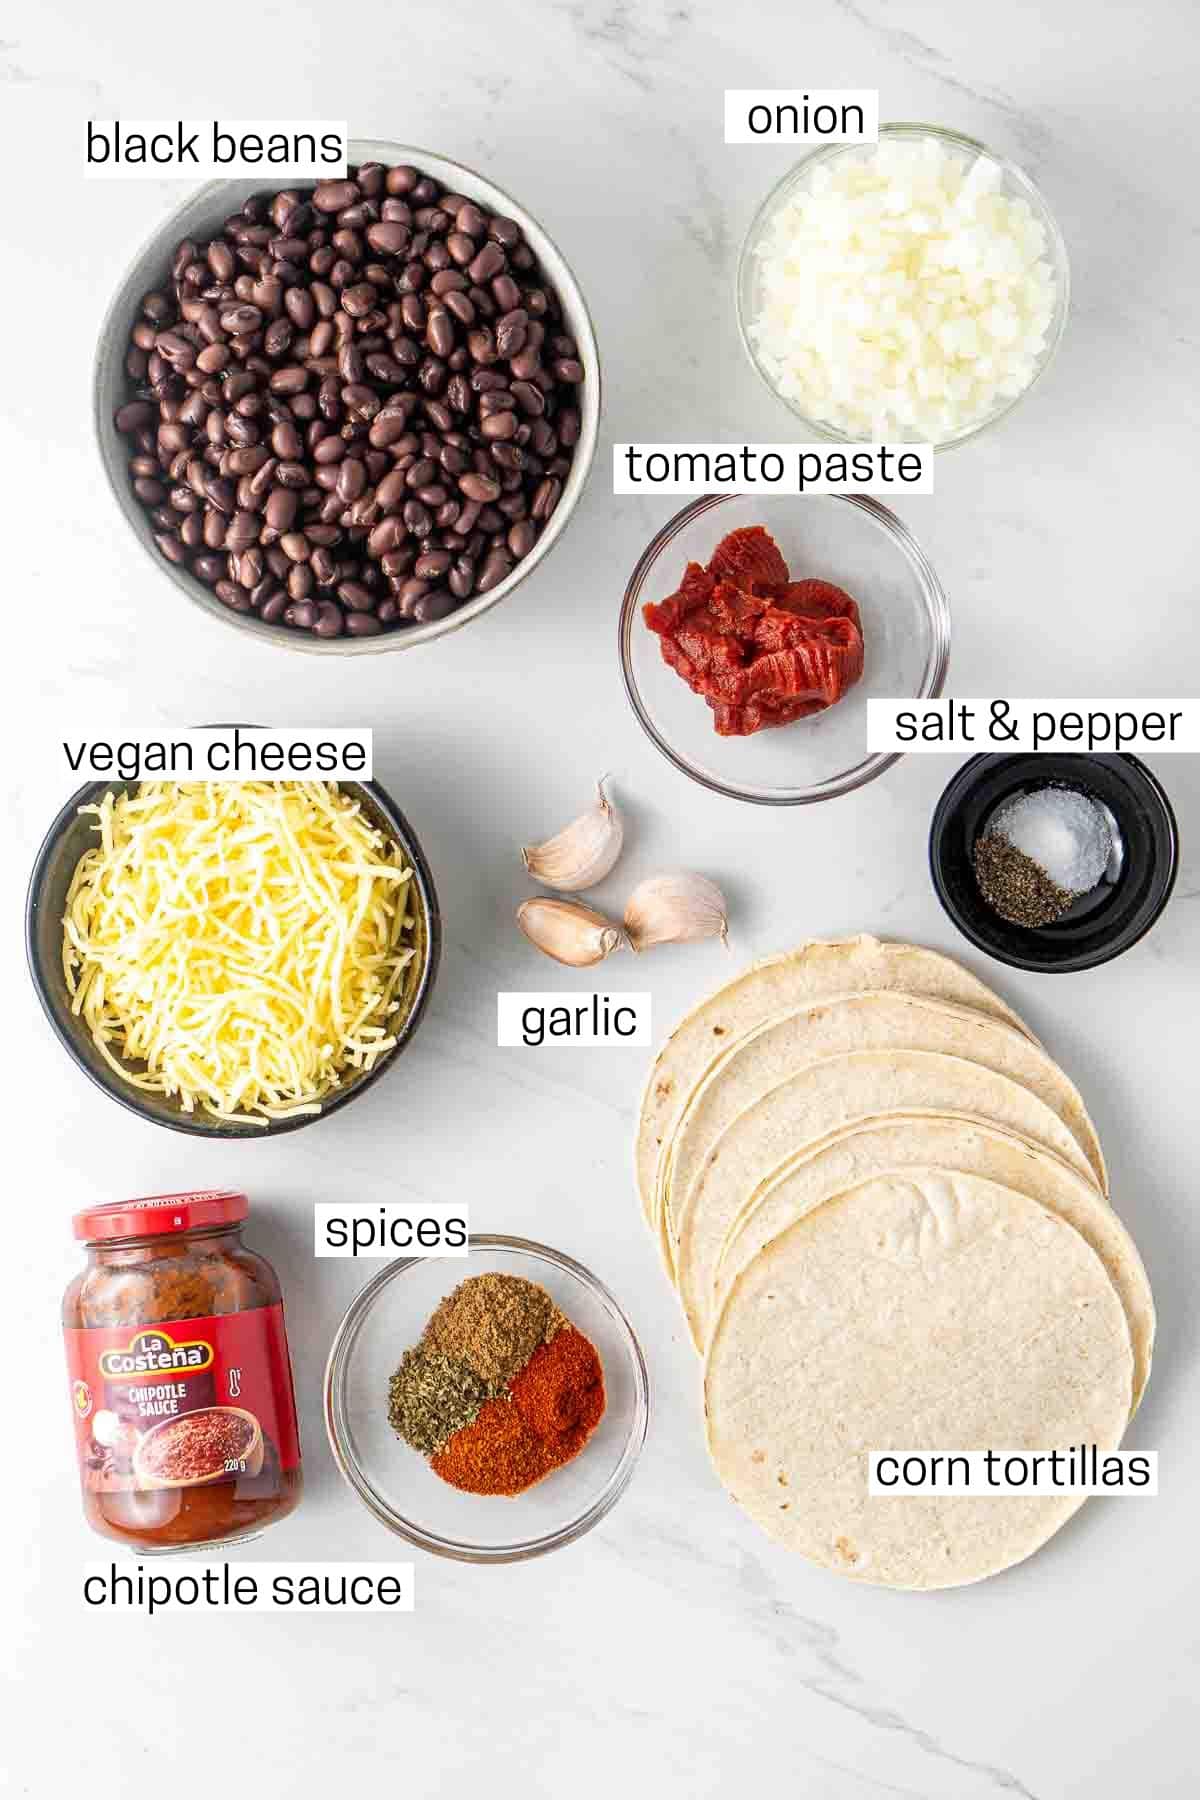 All ingredients needed for black bean tacos laid out in small bowls.